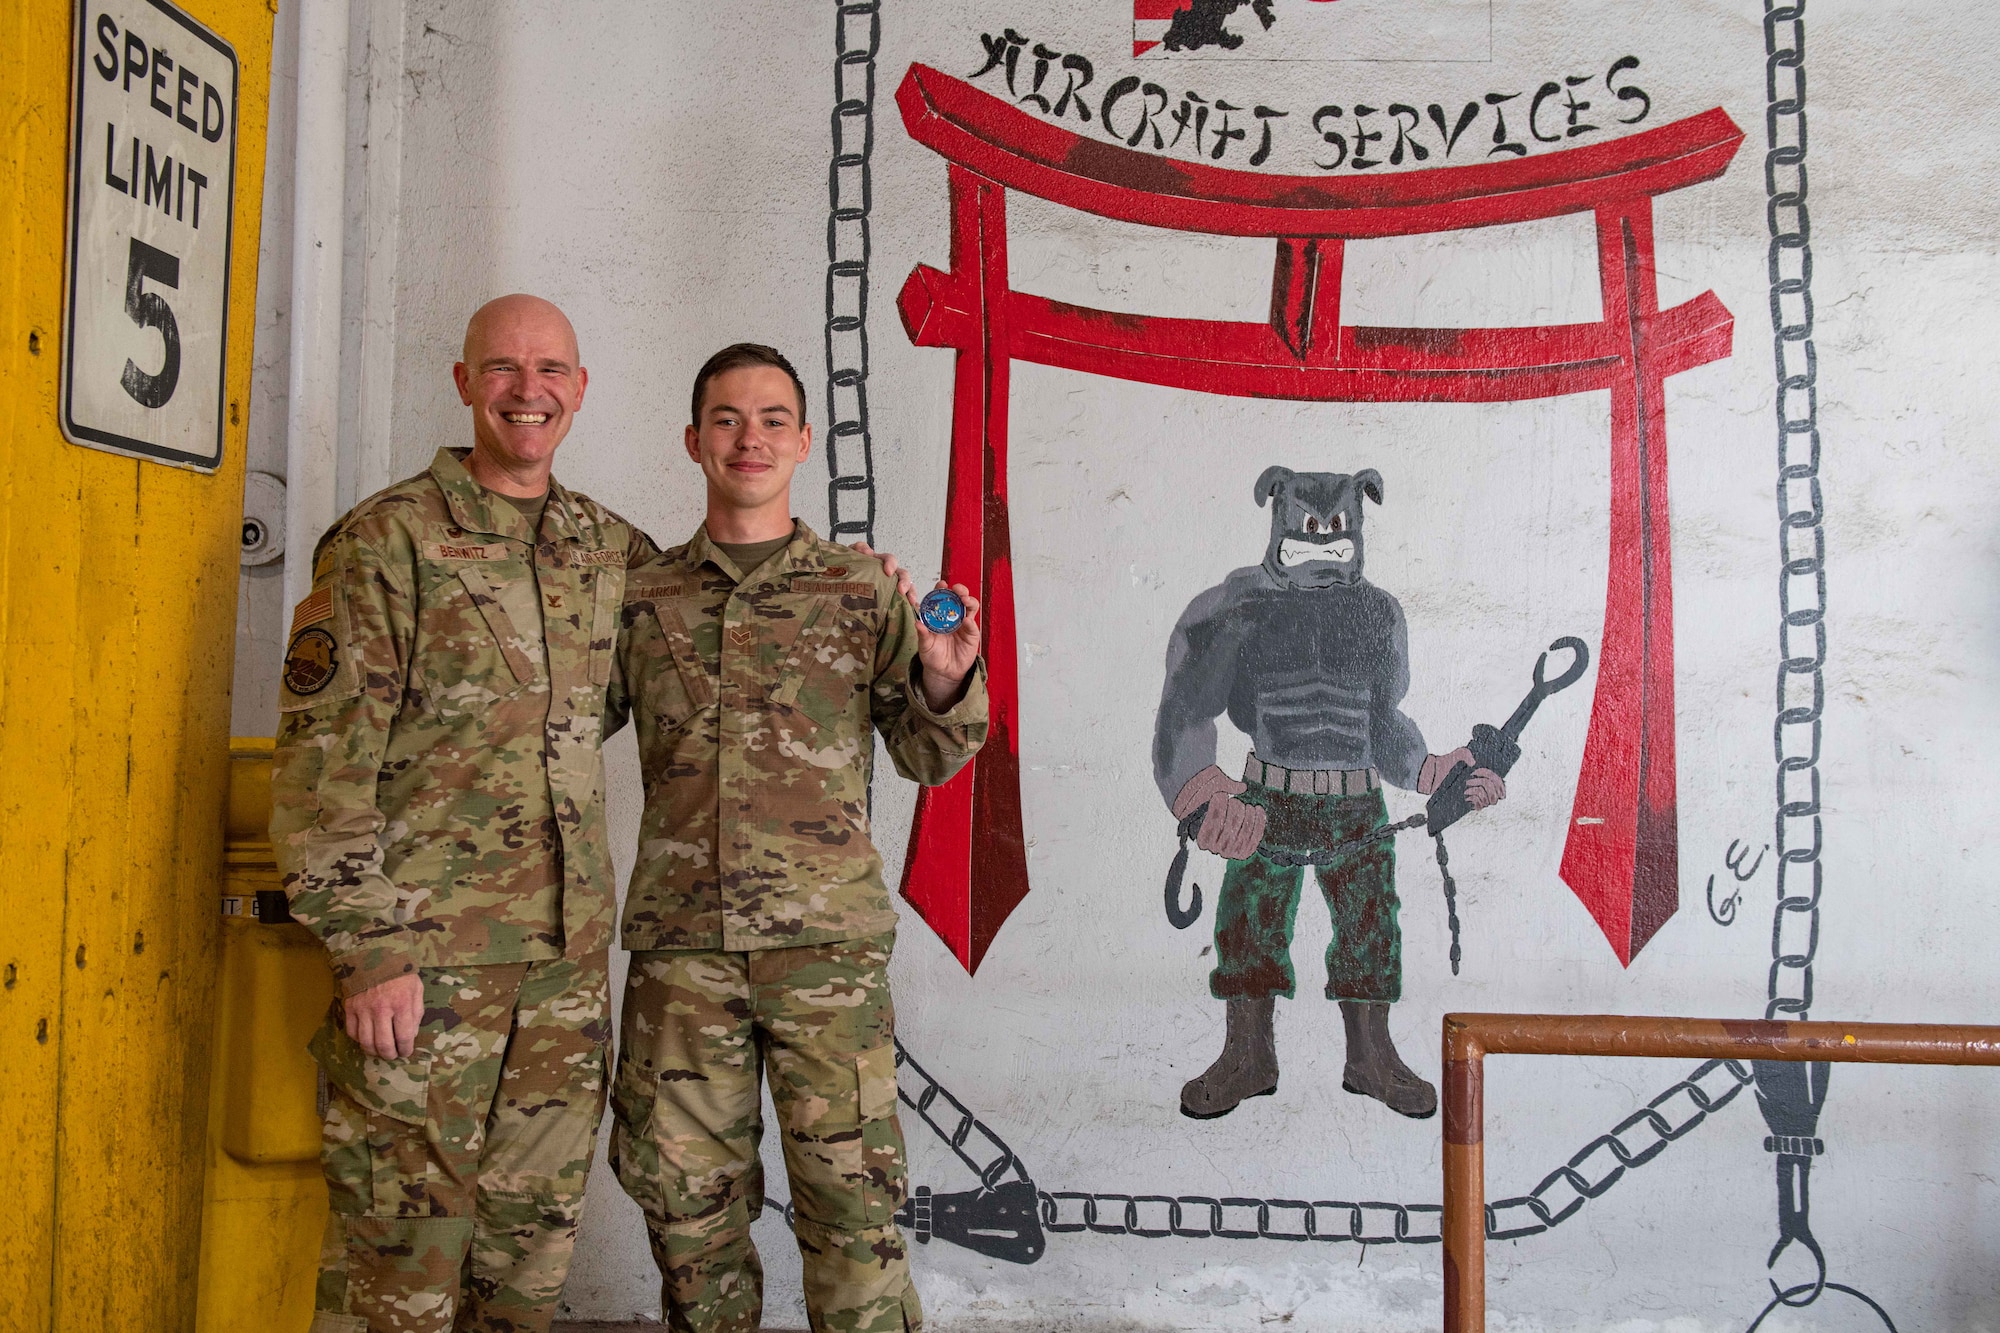 An Airman poses with a Colonel holding a coin